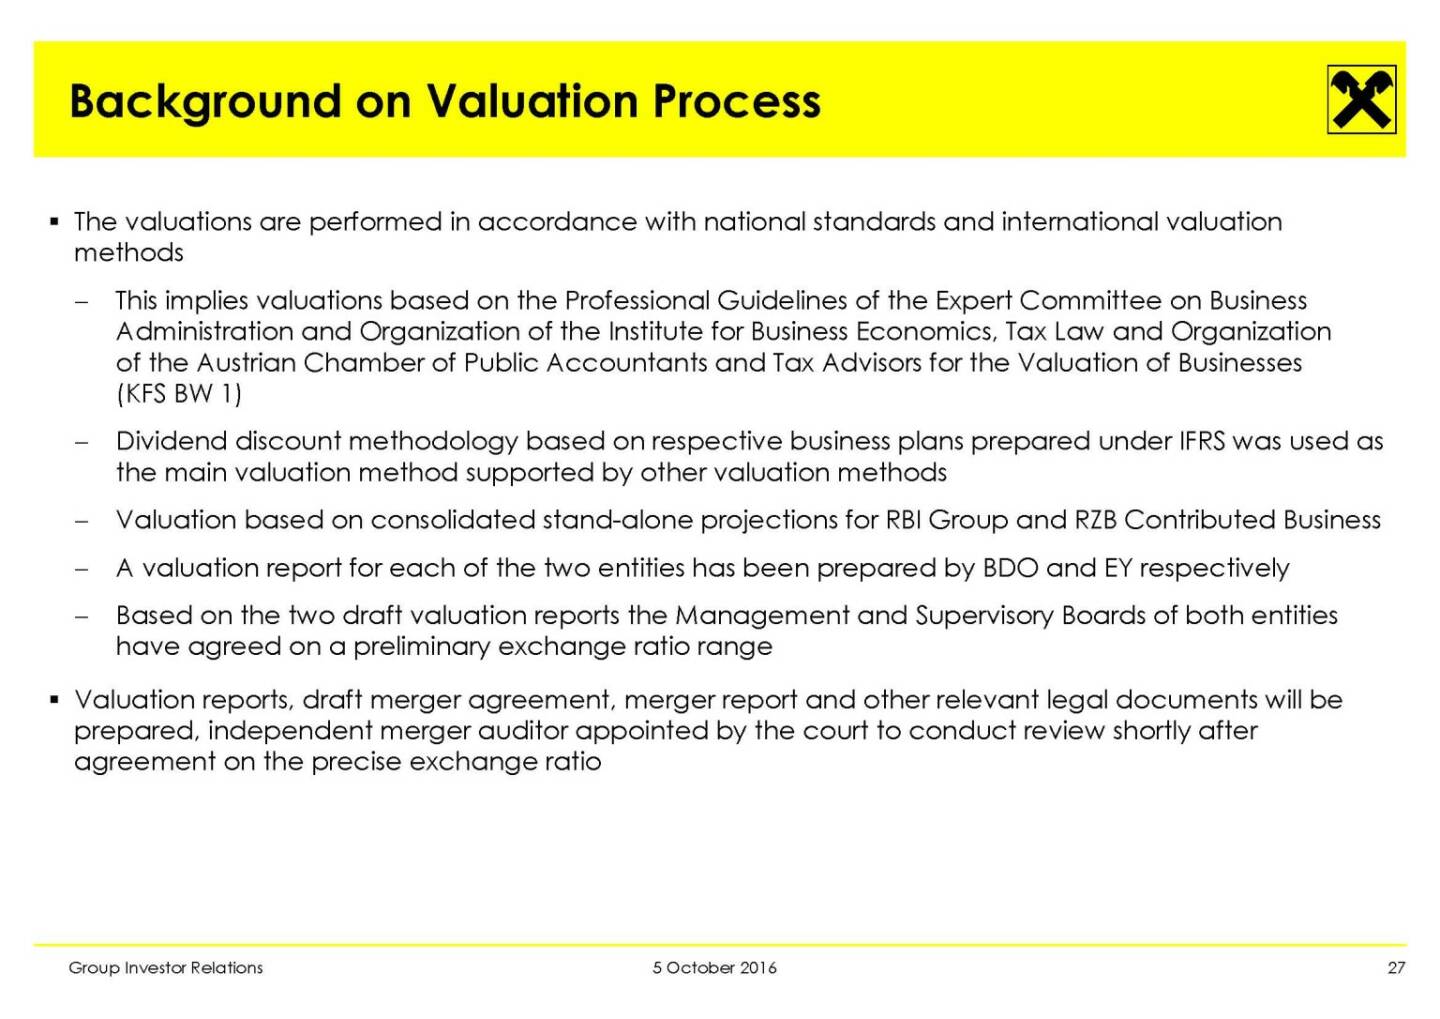 RBI - Background on Valuation Process